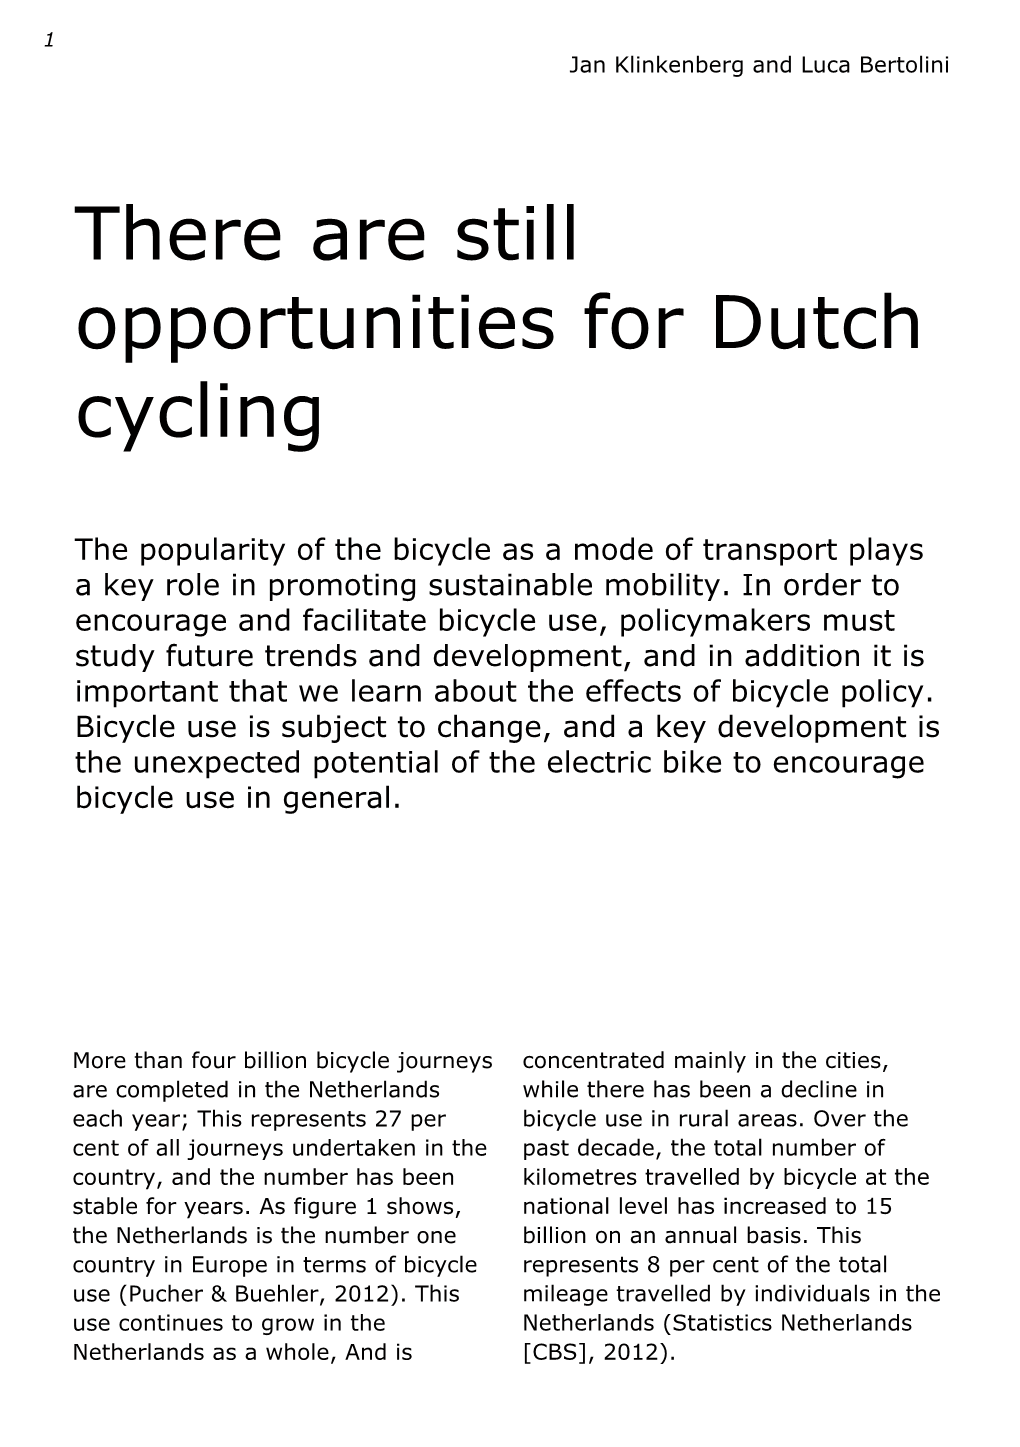 There Are Still Opportunities for Dutch Cycling